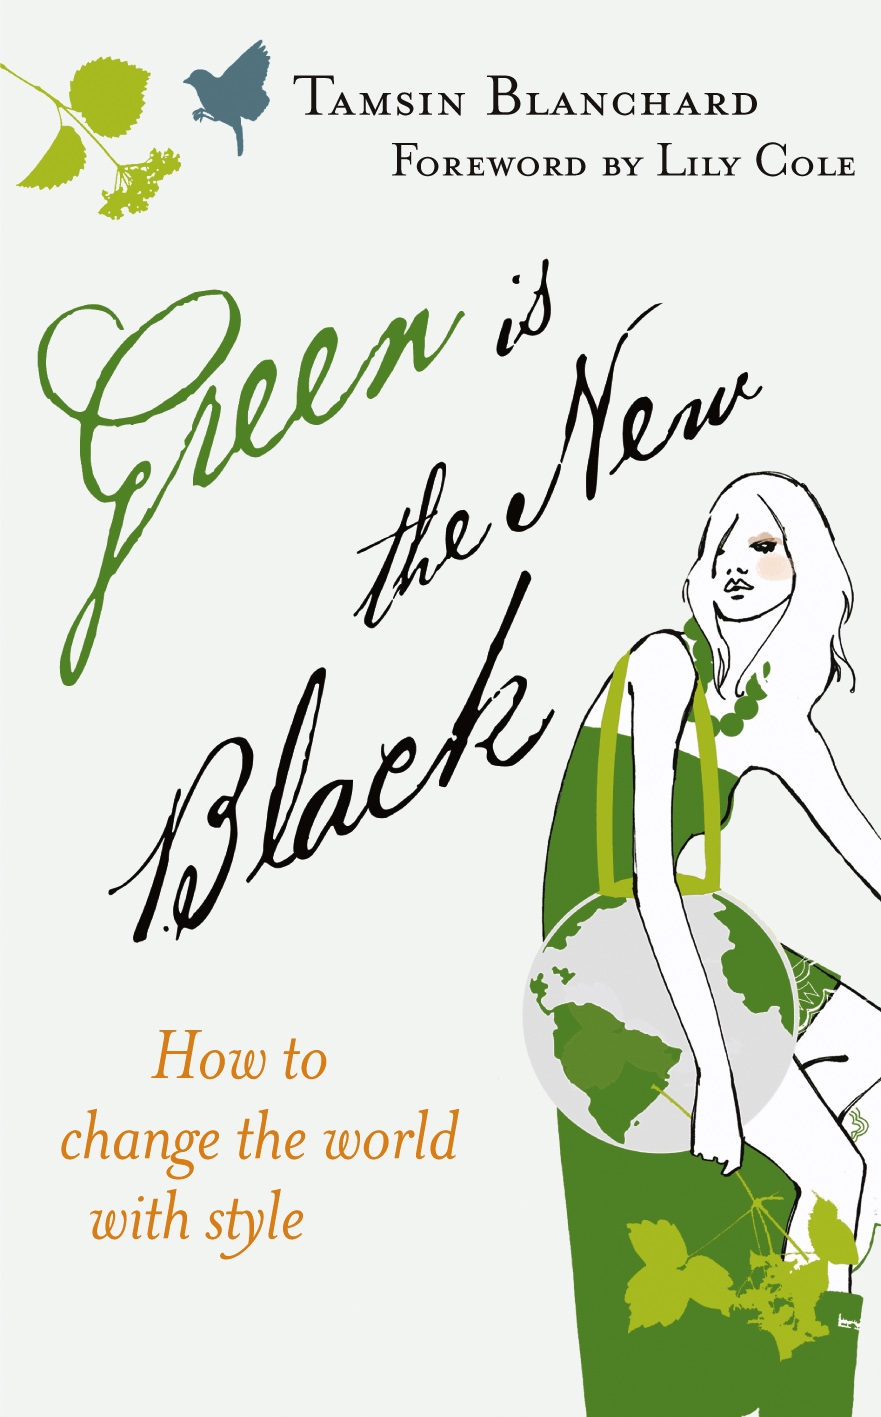 [green+is+the+new+black+high+res.JPG]